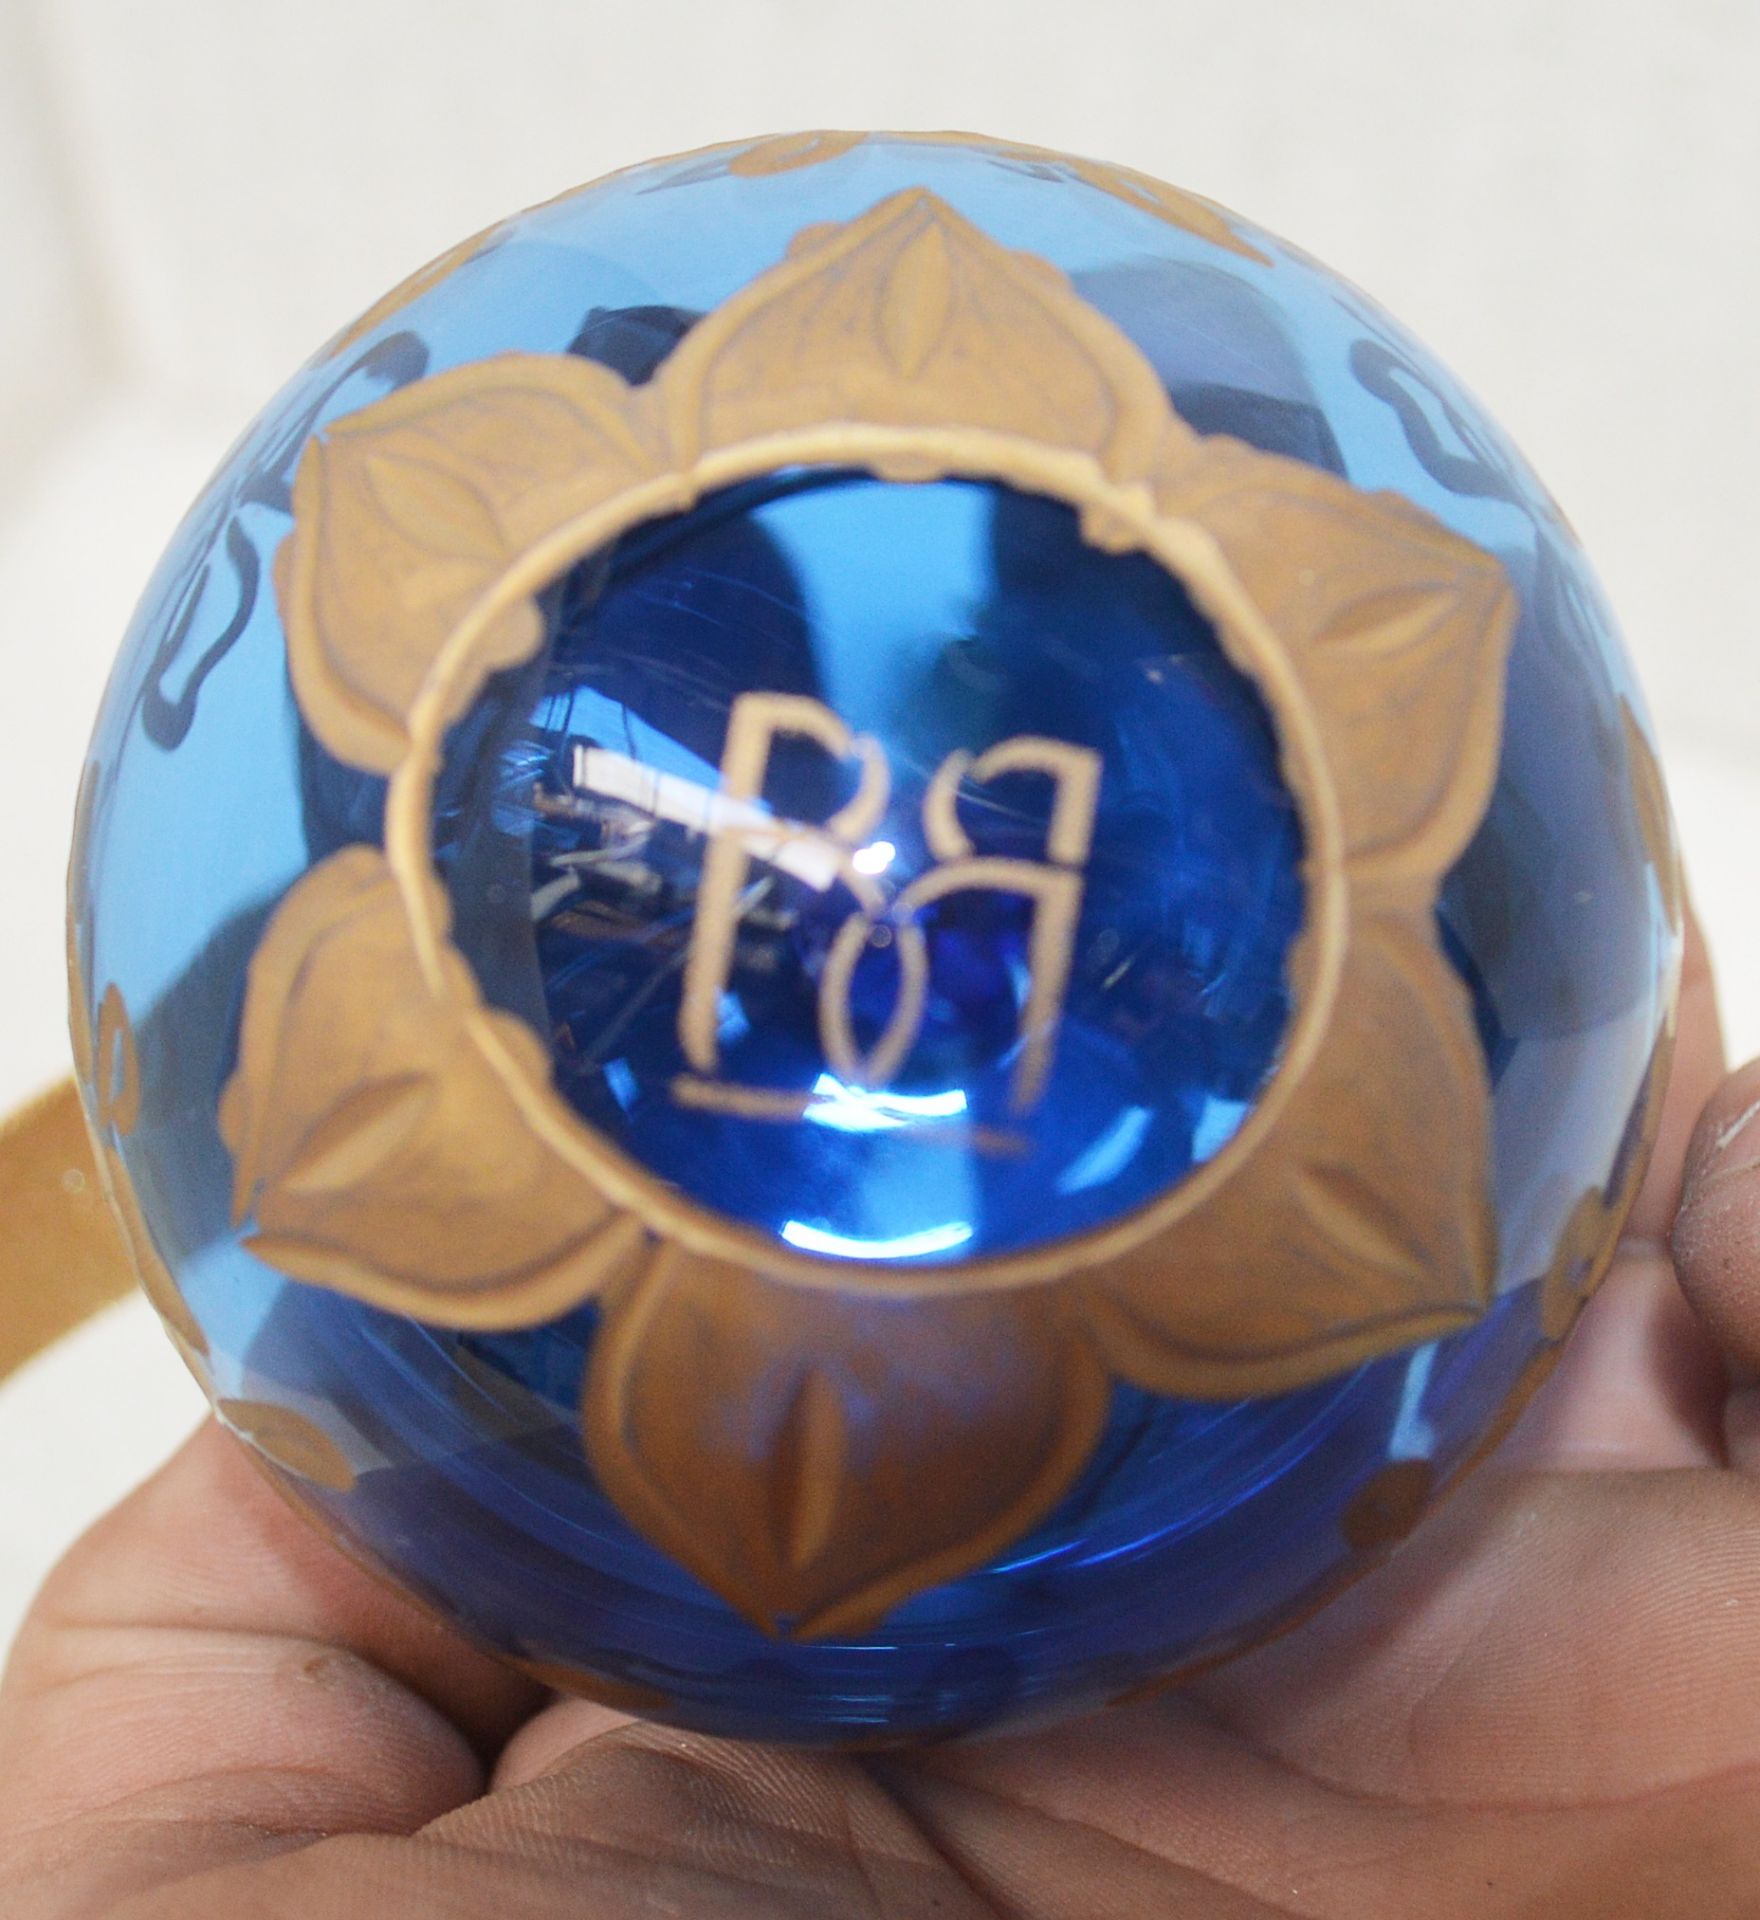 1 x BALDI 'Home Jewels' Italian Hand-crafted Artisan Glass Christmas Tree Decoration In Blue & Gold - Image 3 of 3